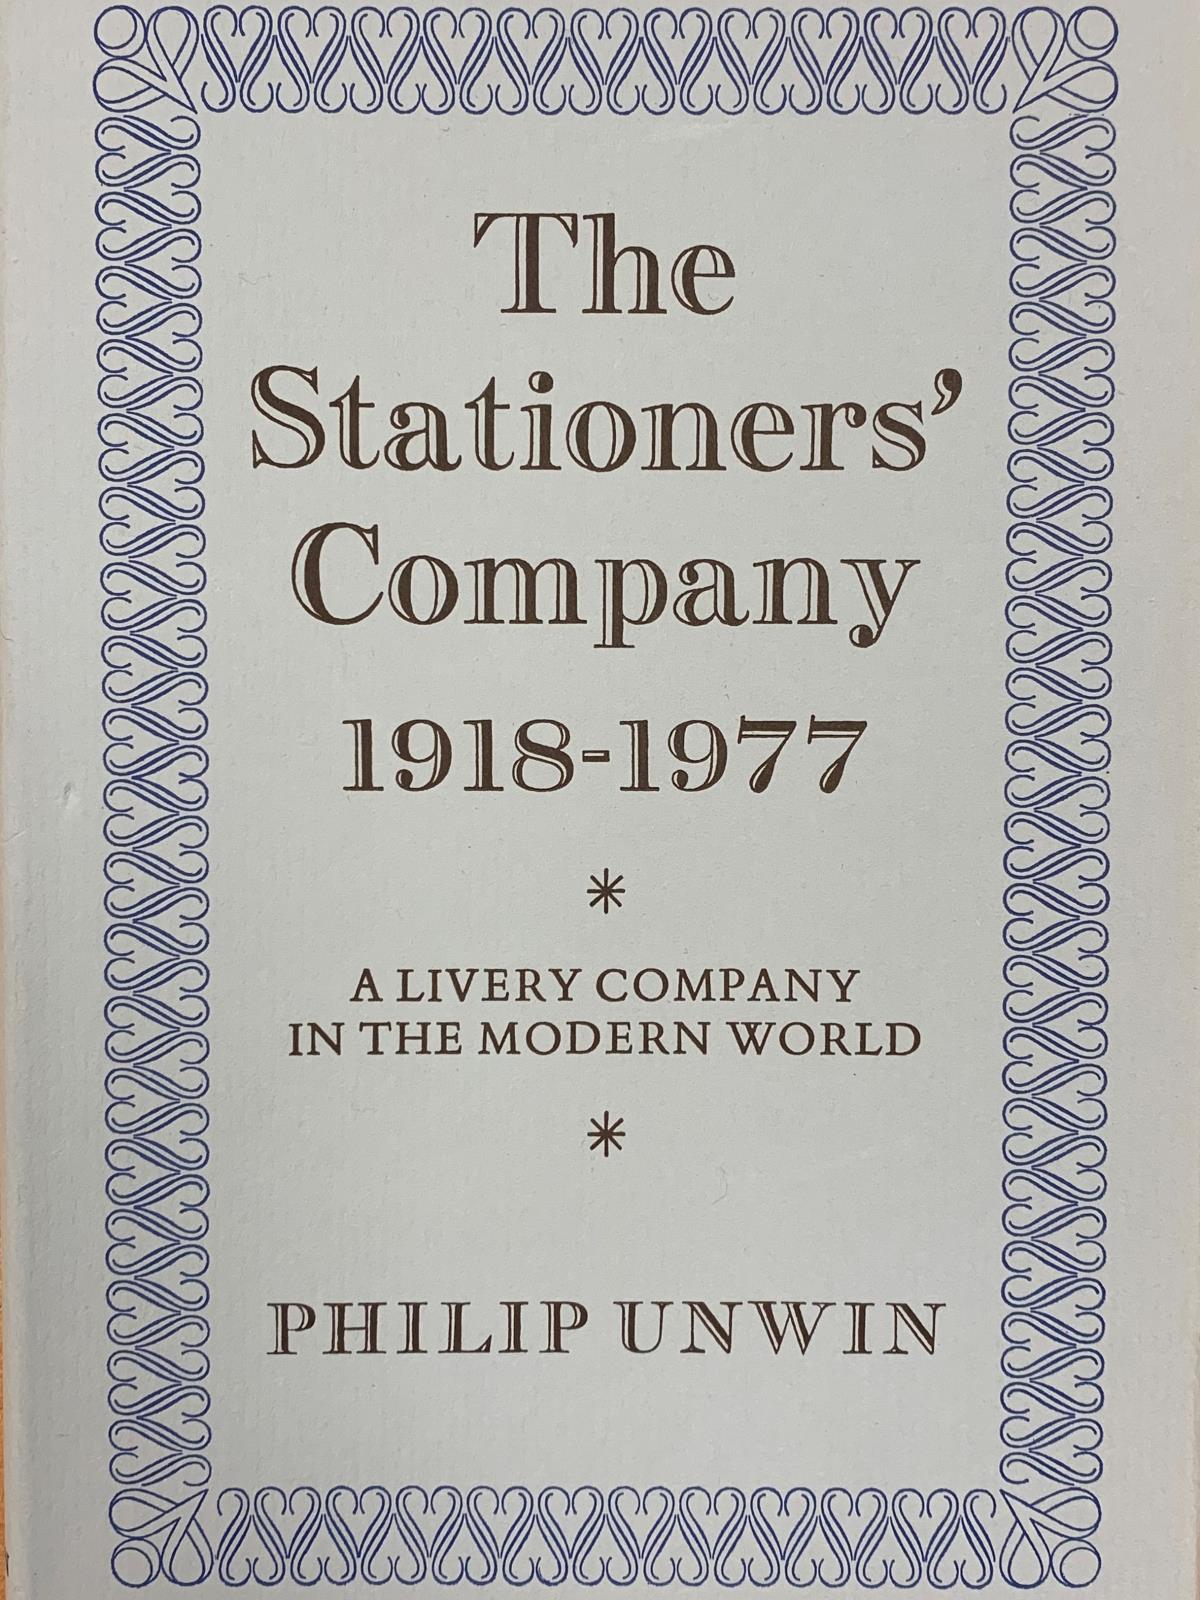 The Stationers’ Company History 1918-1977 by Philip Unwin